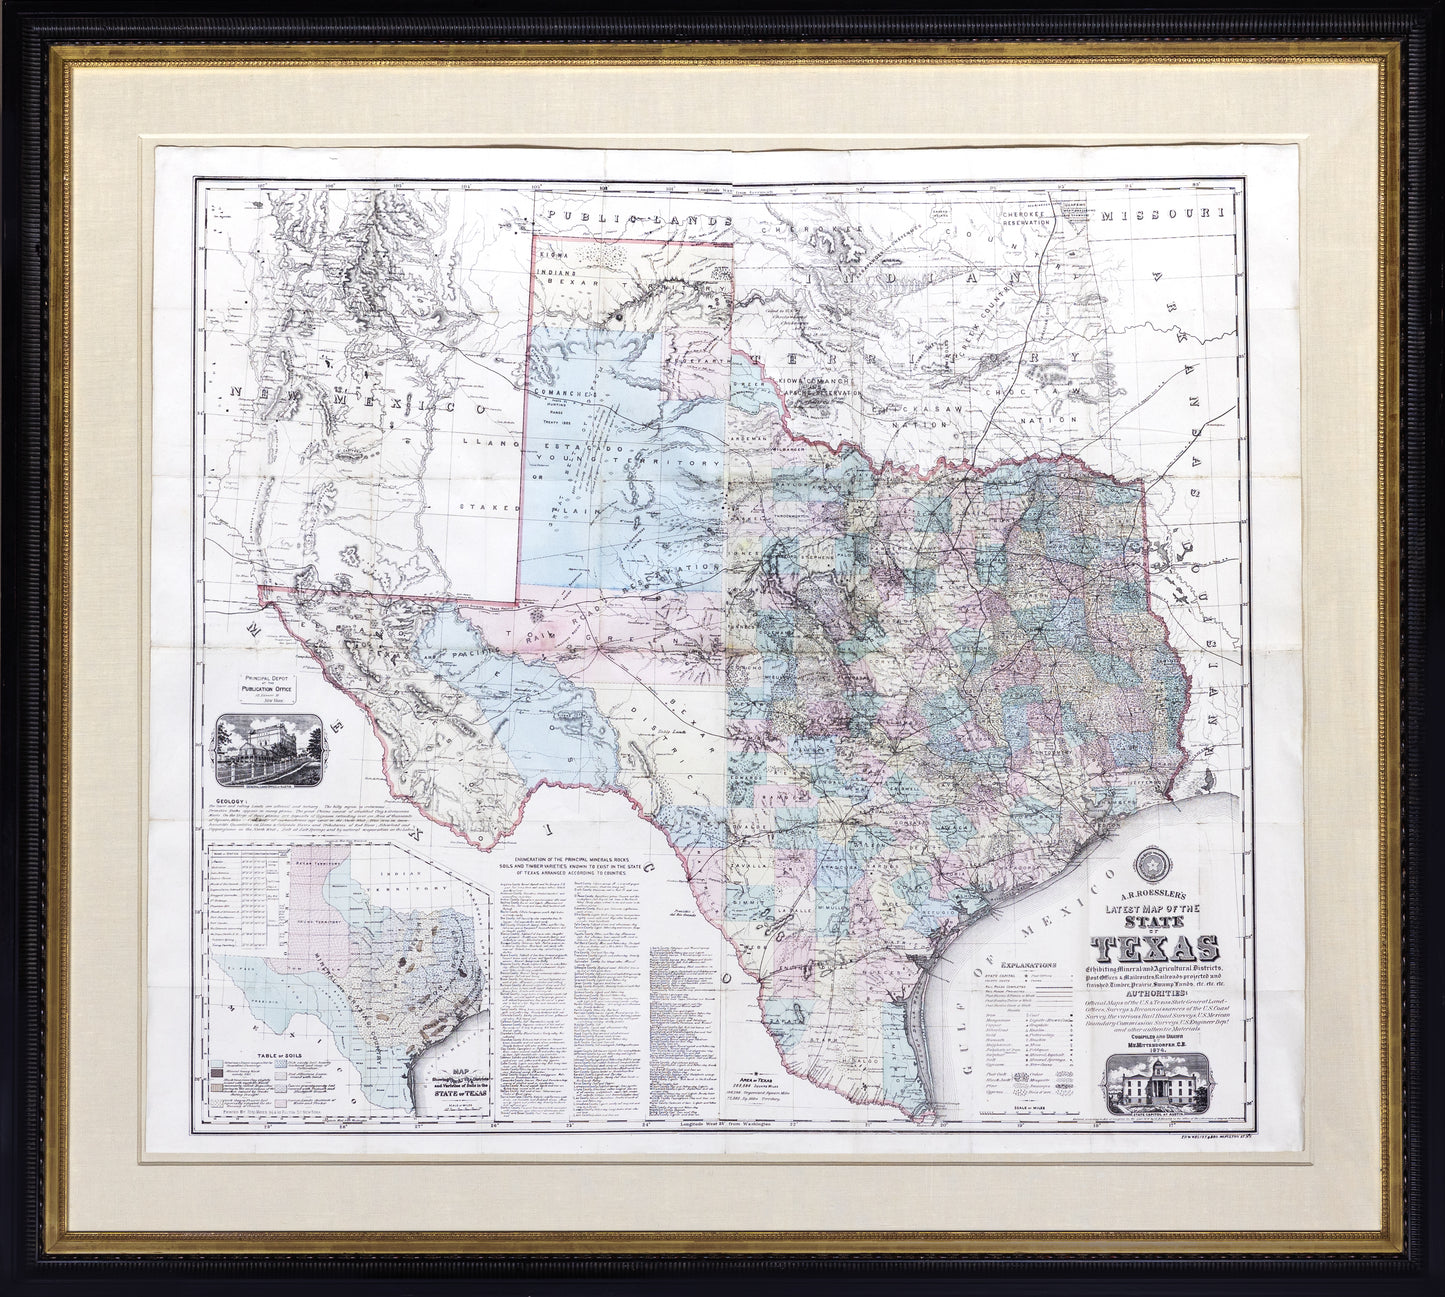 Anton ROESSLER. The Latest Map of the State of Texas...1874